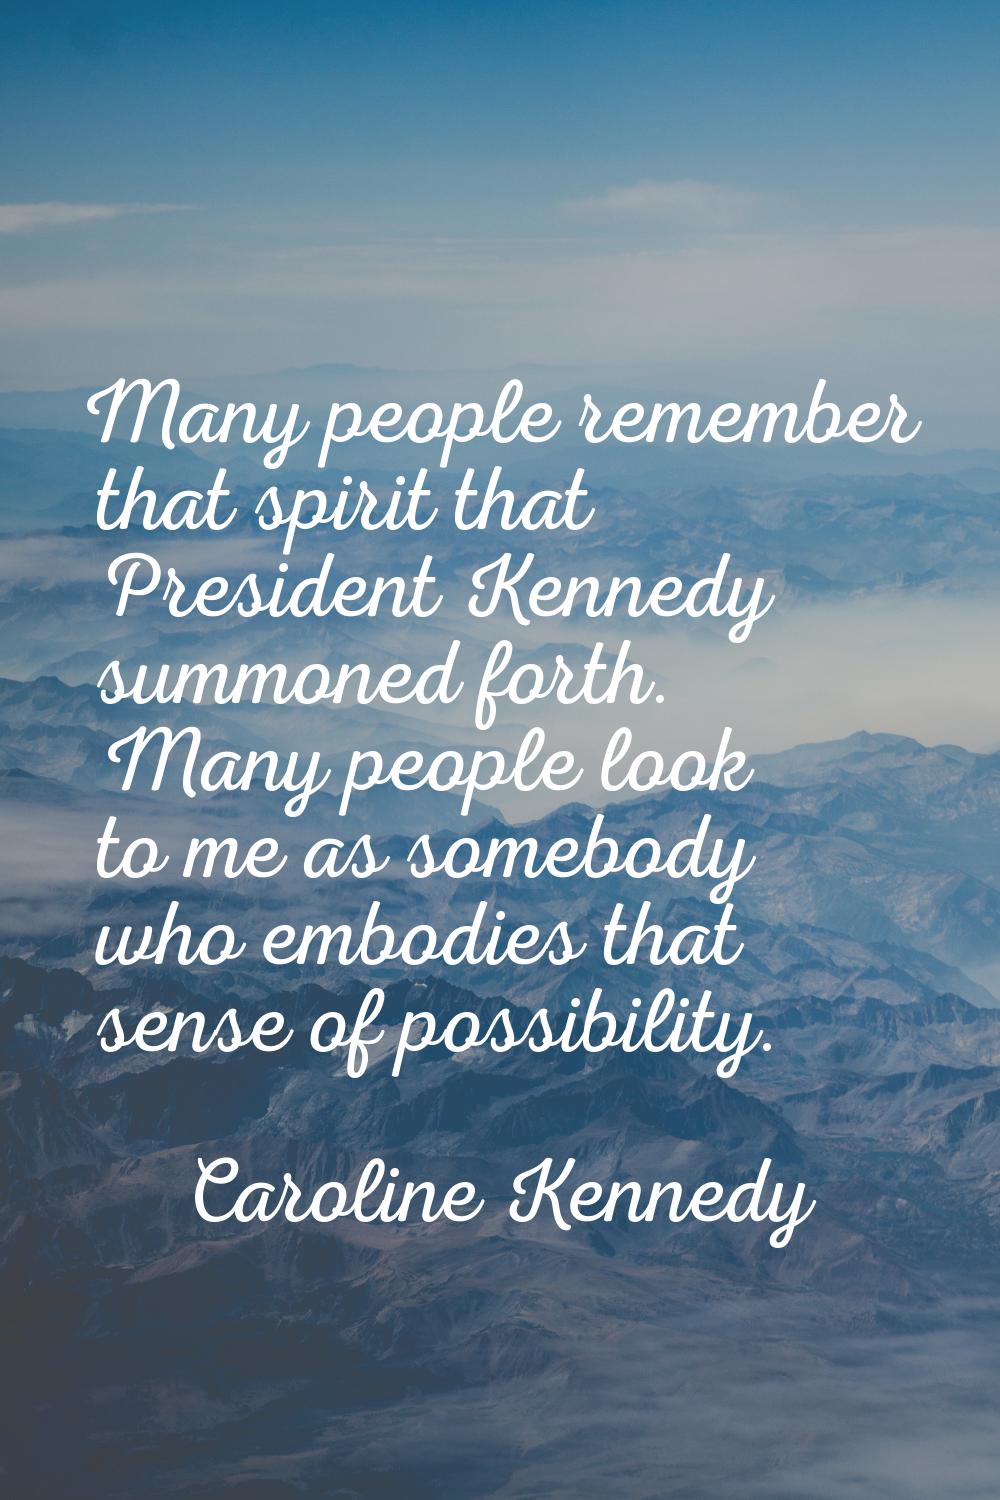 Many people remember that spirit that President Kennedy summoned forth. Many people look to me as s